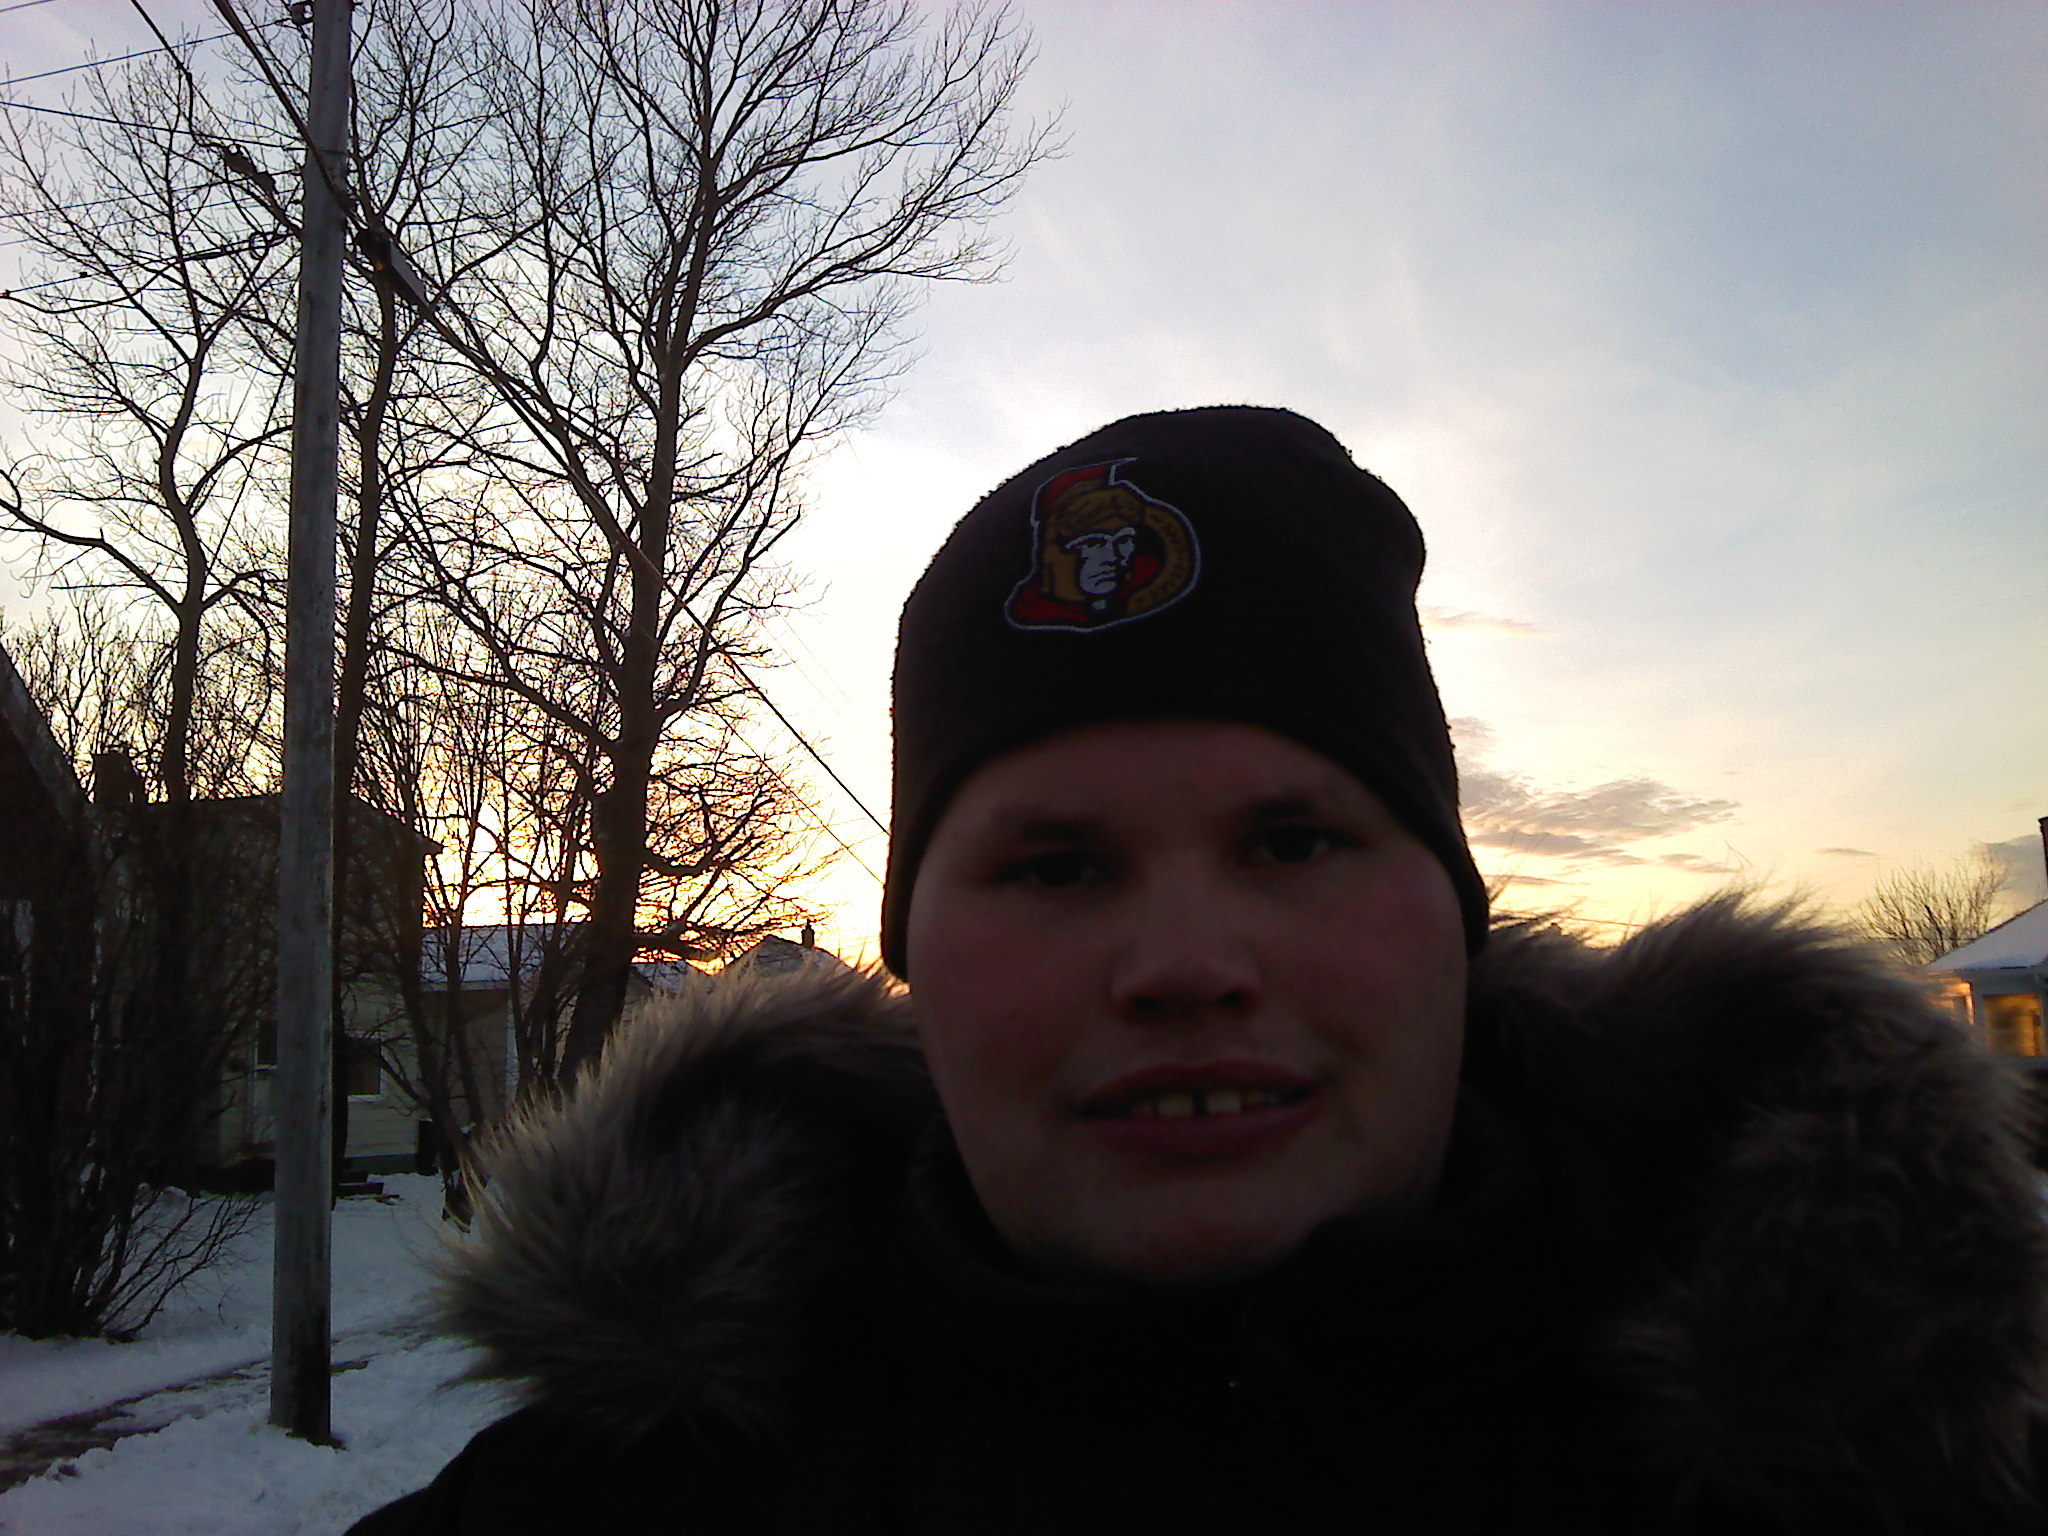 Pictures of Frankie MacDonald